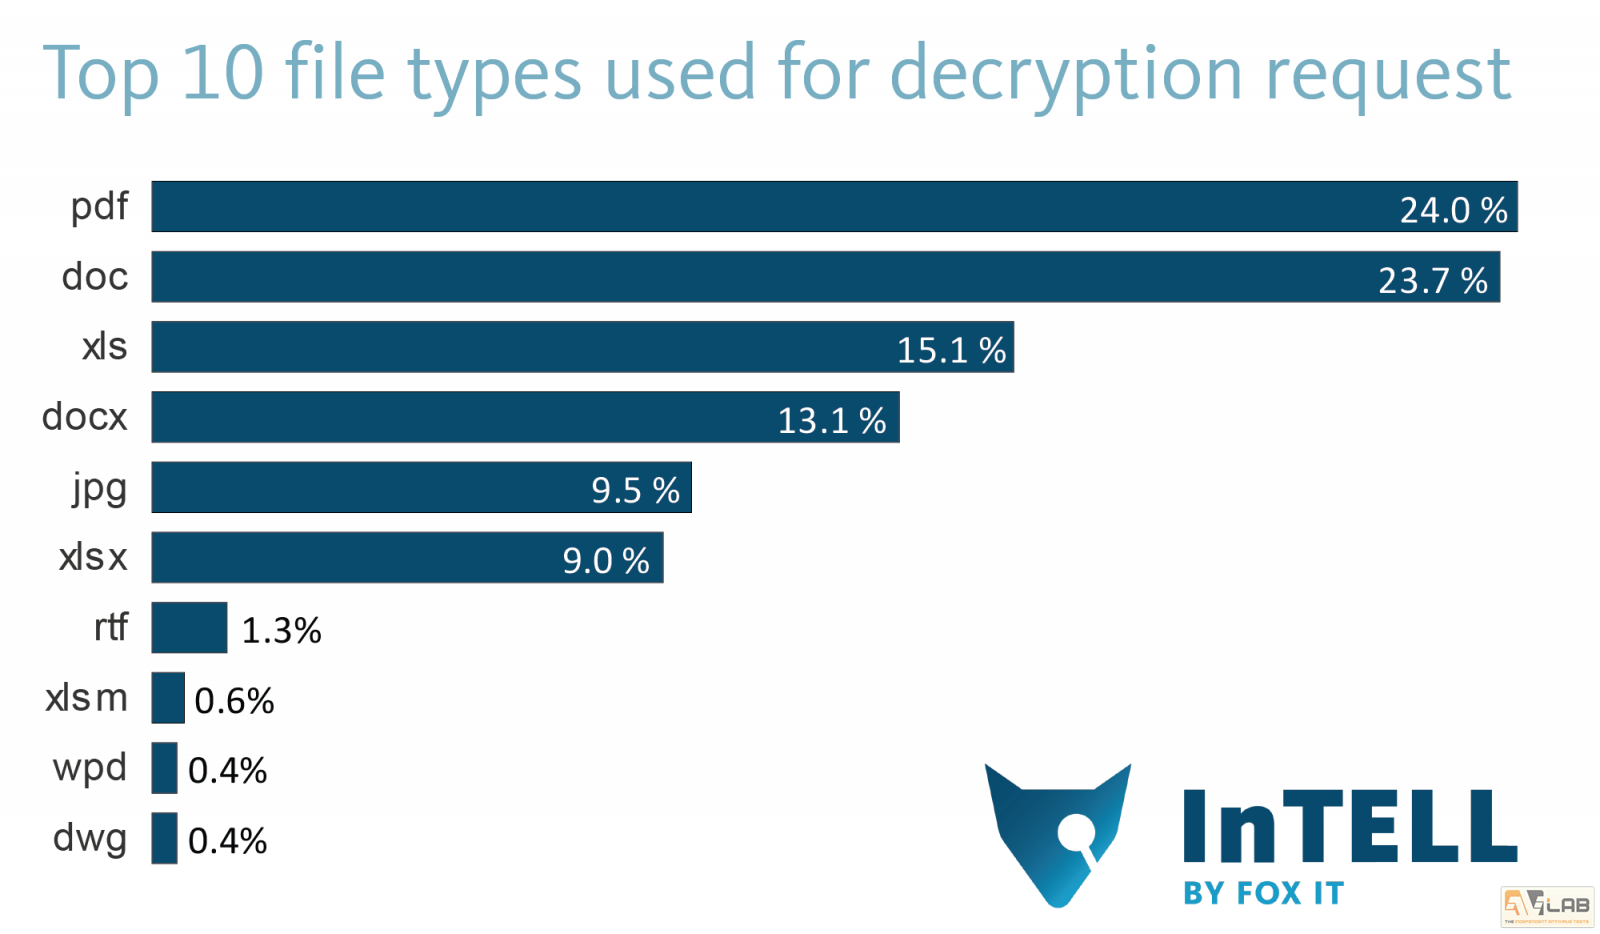 cryptolocker stats top10 filetypes rounded